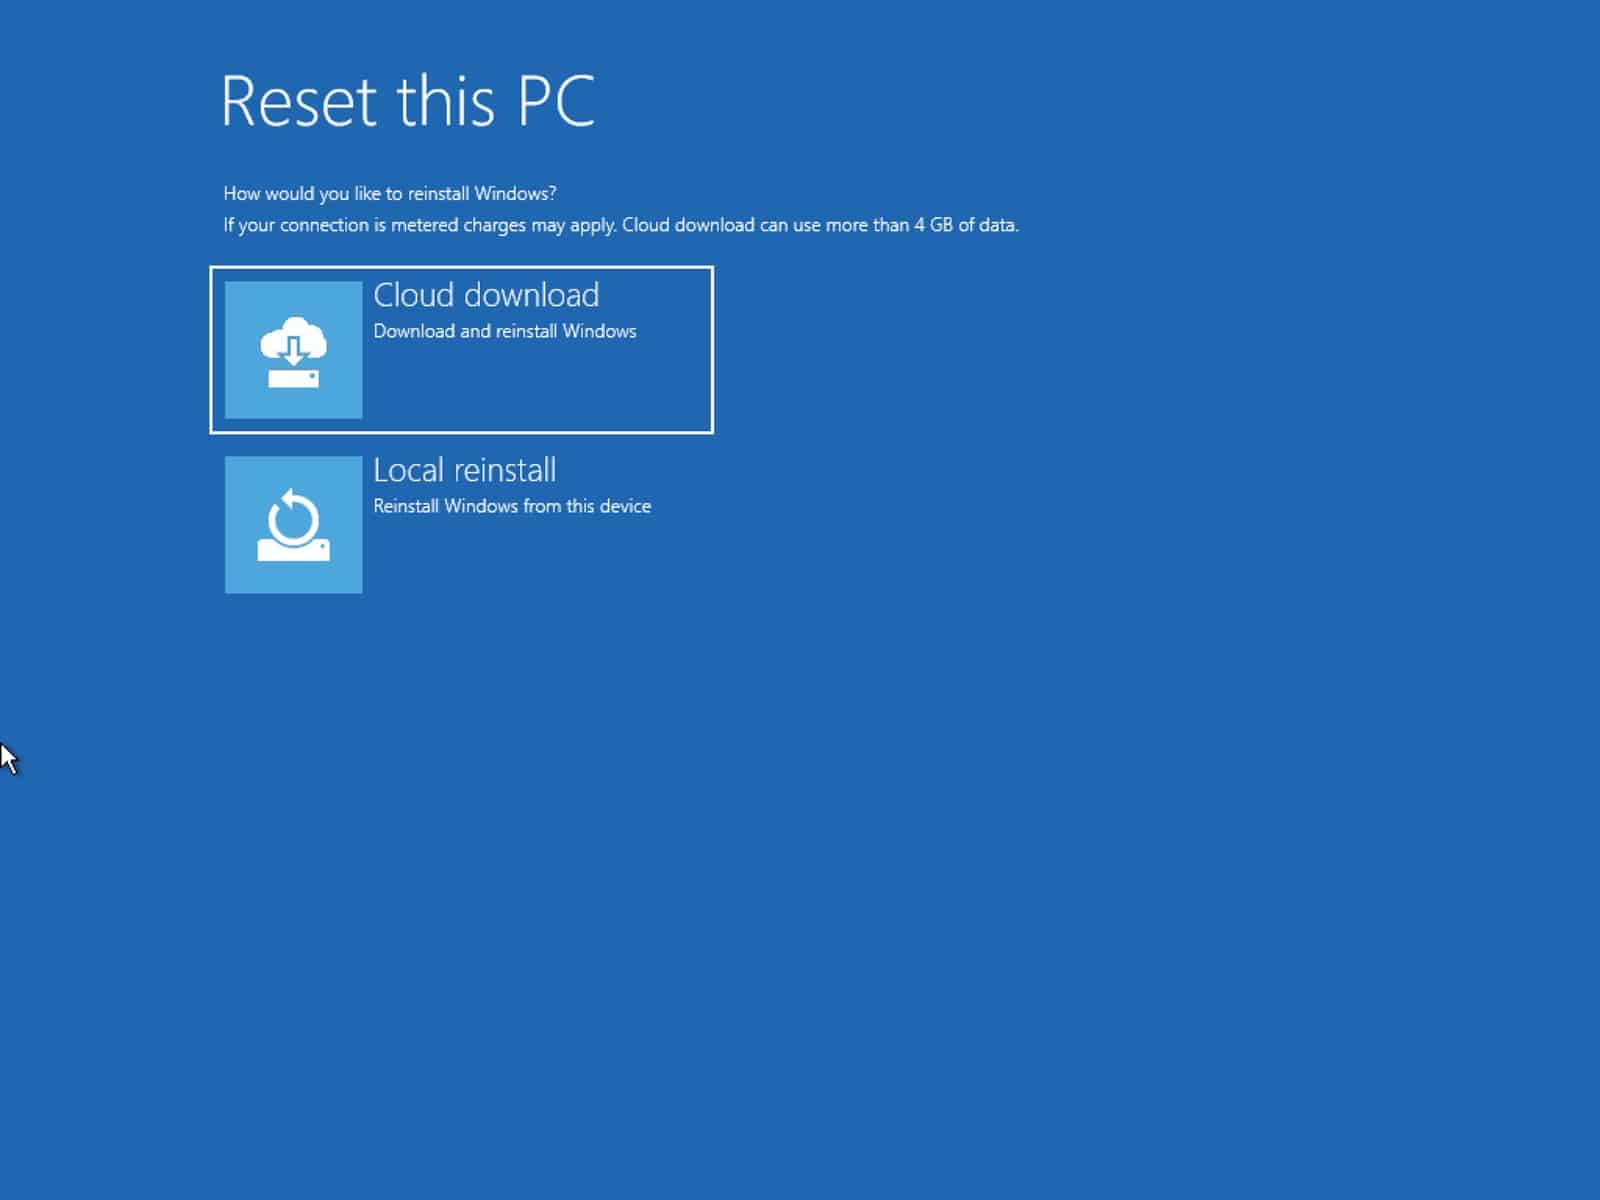 We Can't Reactivate Windows As Our Servers Aren't Available Right Now